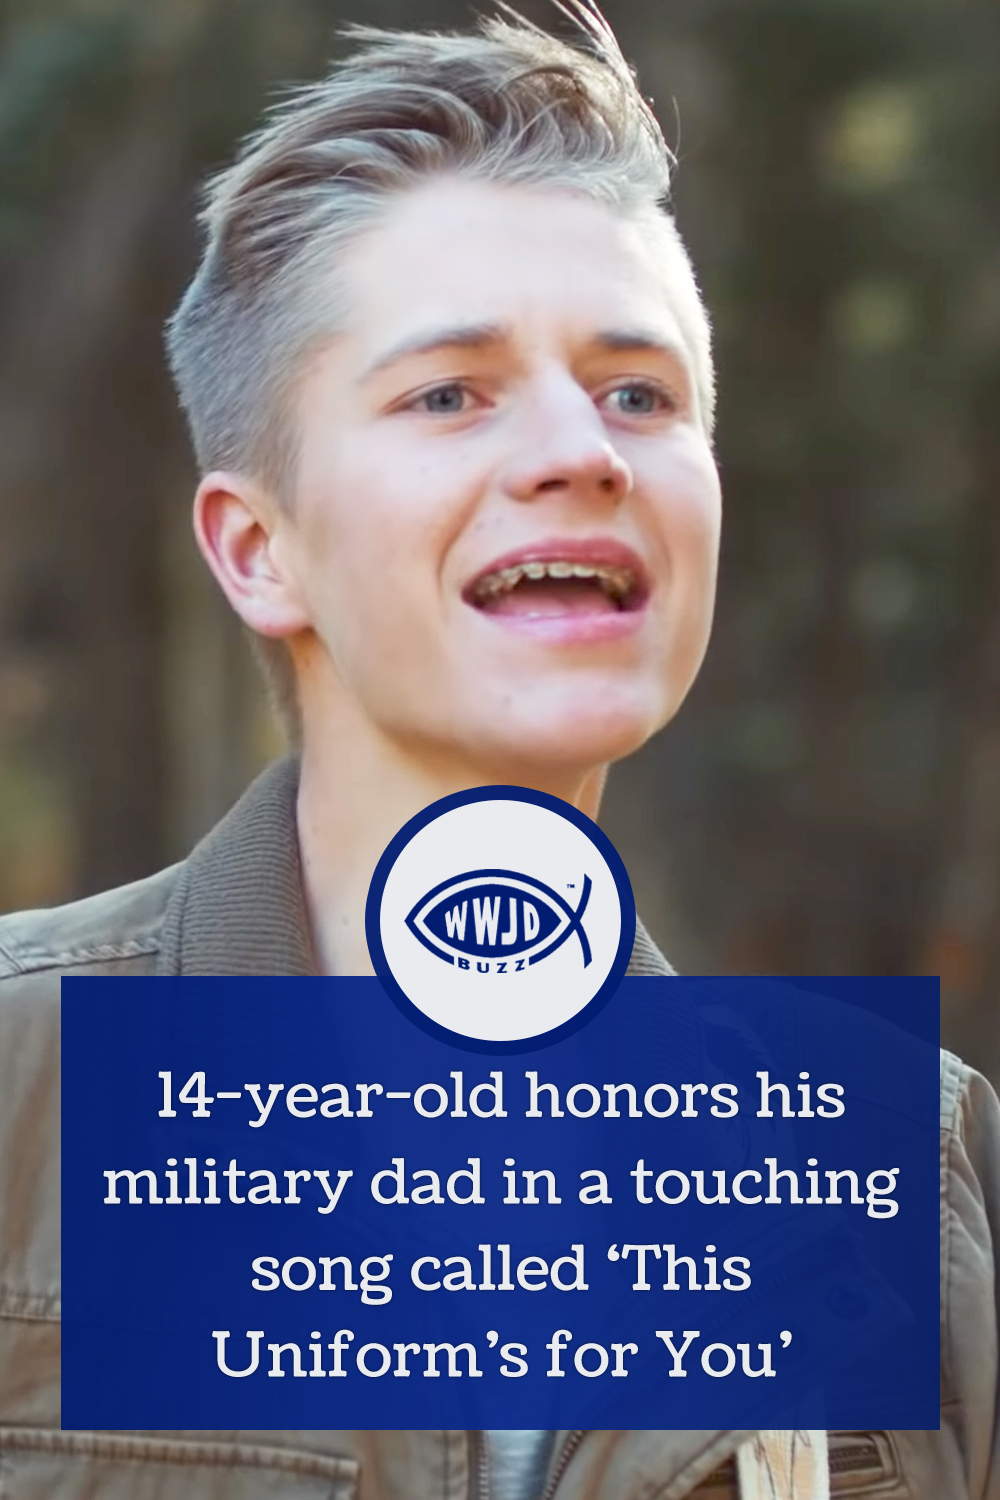 14-year-old honors his military dad in a touching song called ‘This Uniform’s for You’